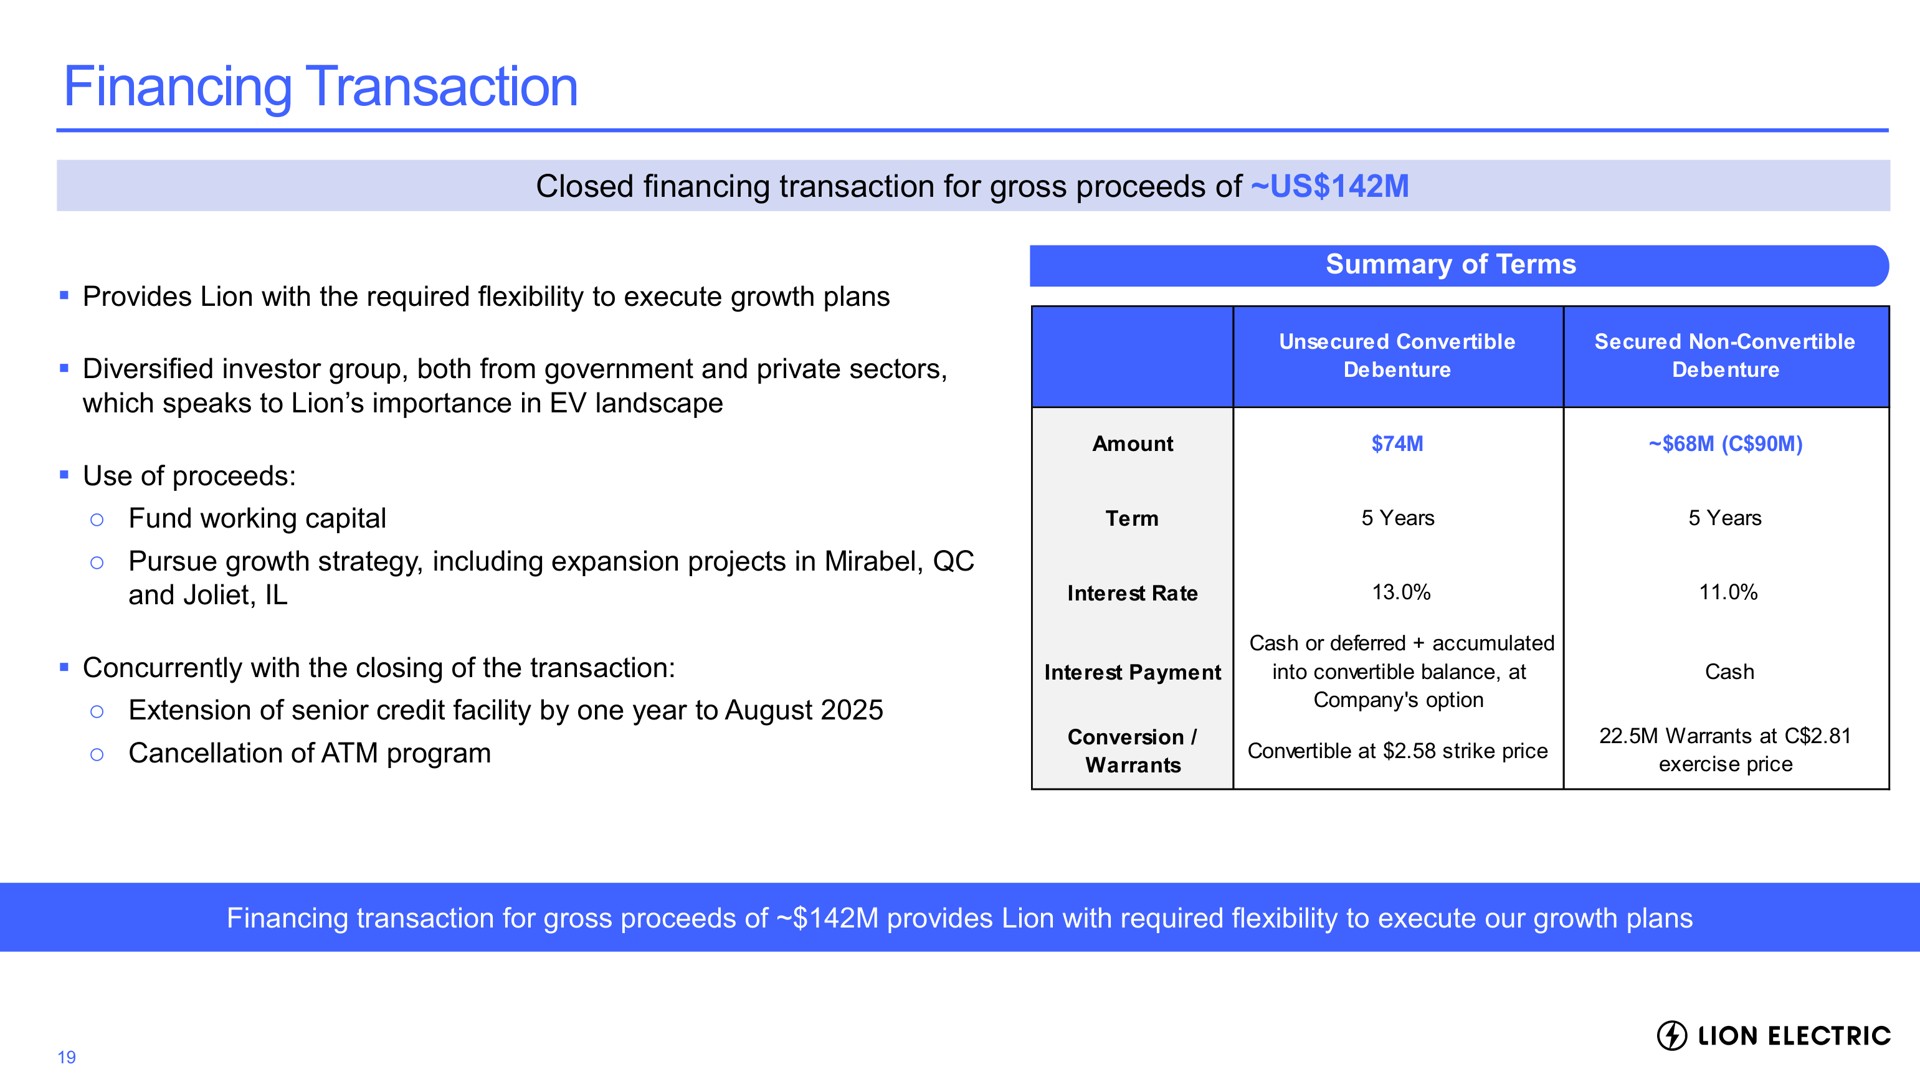 financing transaction closed financing transaction for gross proceeds of us provides lion with the required flexibility to execute growth plans diversified investor group both from government and private sectors which speaks to lion importance in landscape use fund working capital pursue growth strategy including expansion projects in and interest rate amount term years summary terms by years cash concurrently with the closing the interest payment into convertible balance at extension senior credit facility by one year to august company option cancellation program provides lion with required flexibility to execute our growth plans lion electric | Lion Electric